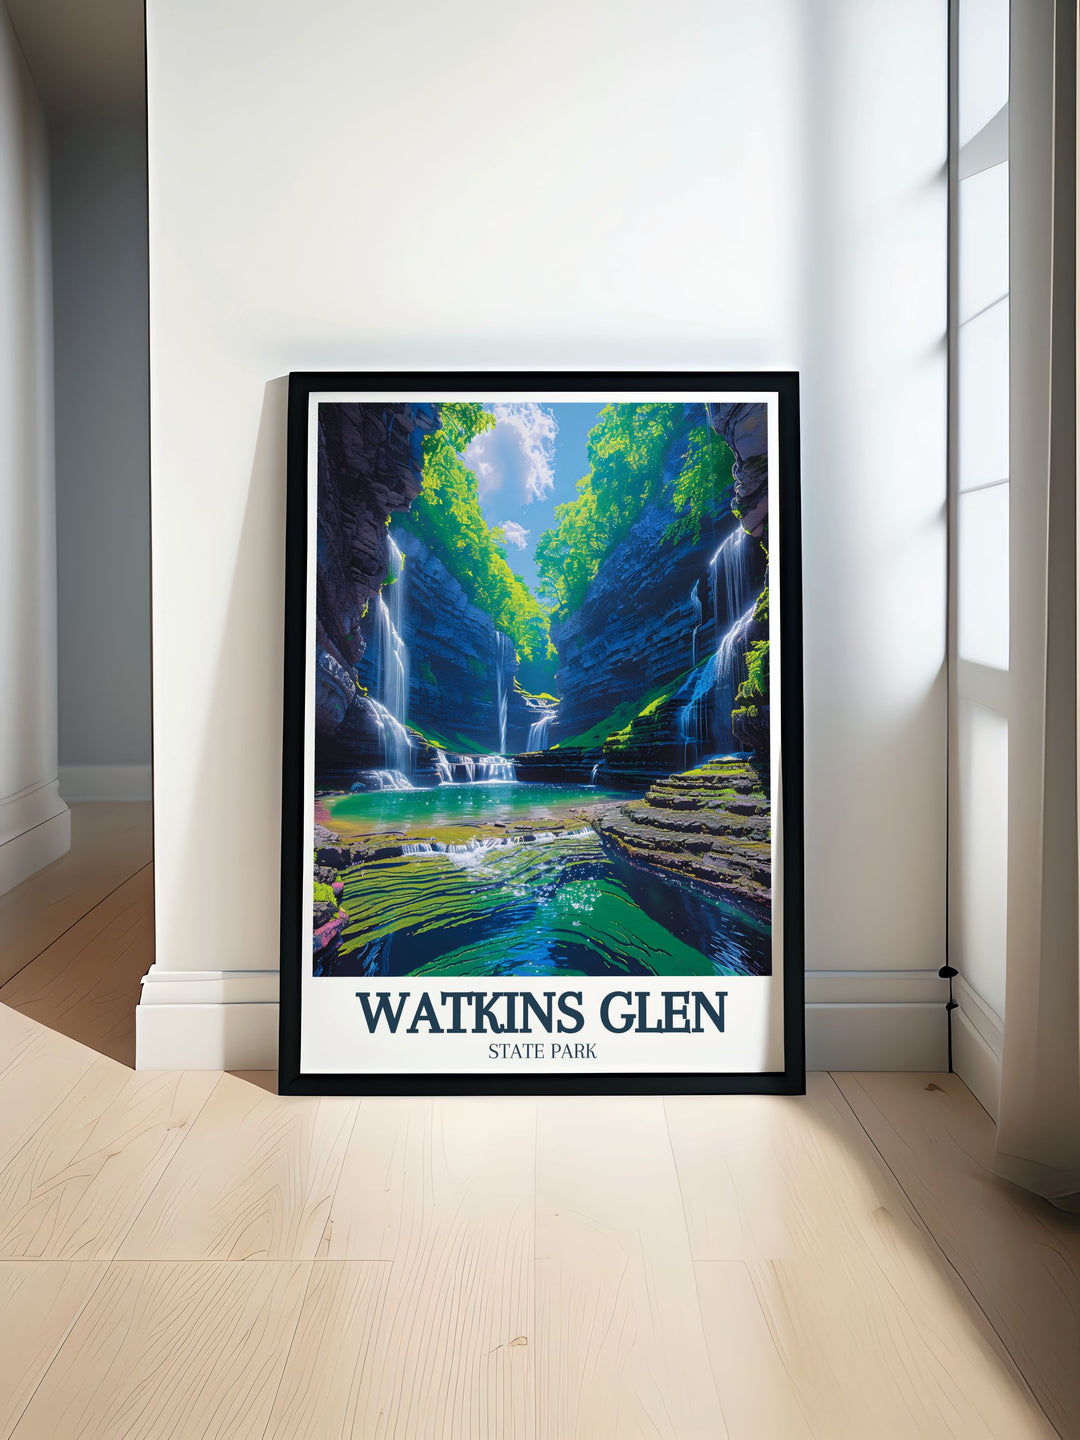 Historic natural wonders come to life with this framed art of Watkins Glen State Park. The detailed artwork captures the parks timeless beauty and geological significance, making it a great choice for adding a touch of New Yorks natural heritage to your decor. Its an elegant reminder of the states cherished parks and geological history.